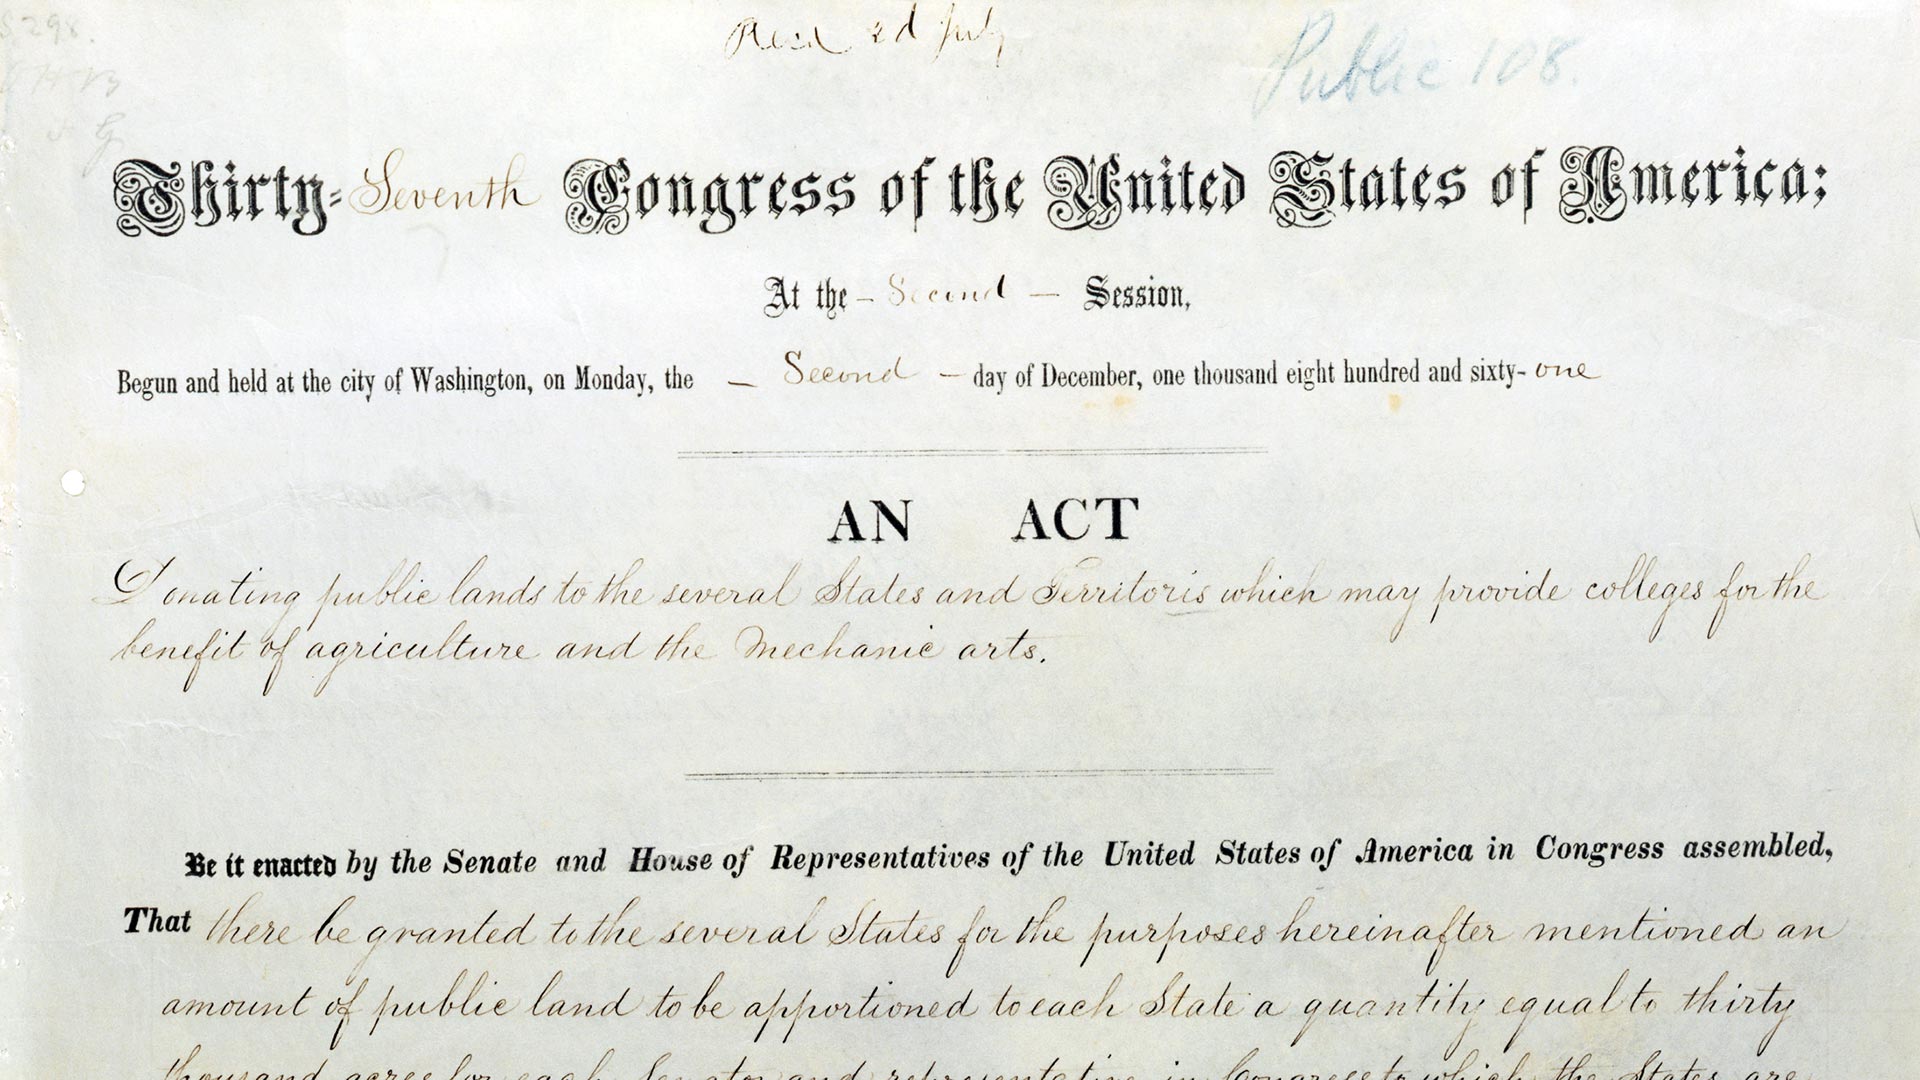 UI150: The Morrill Land Grant Act overview image